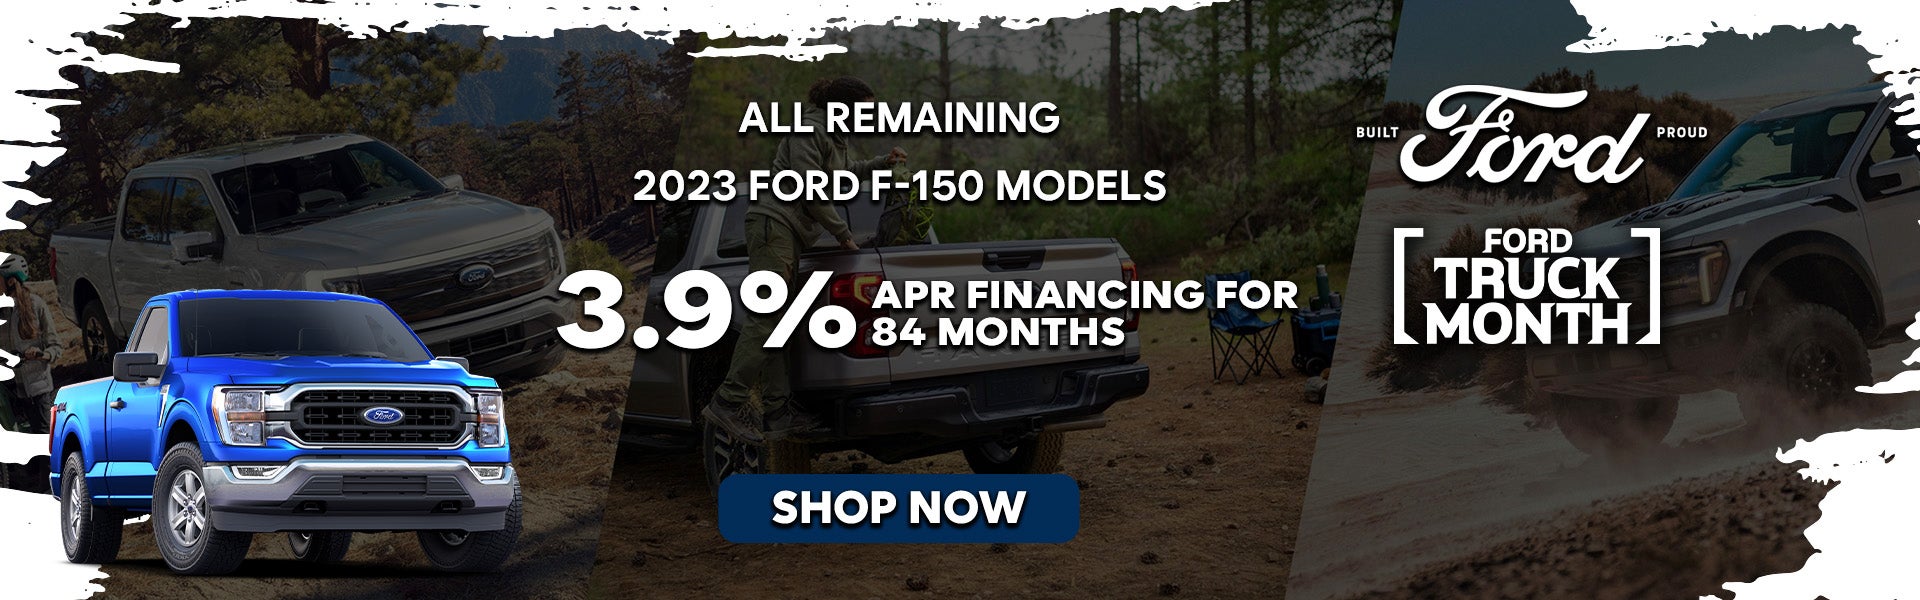 Remaining 2023 Ford F-150